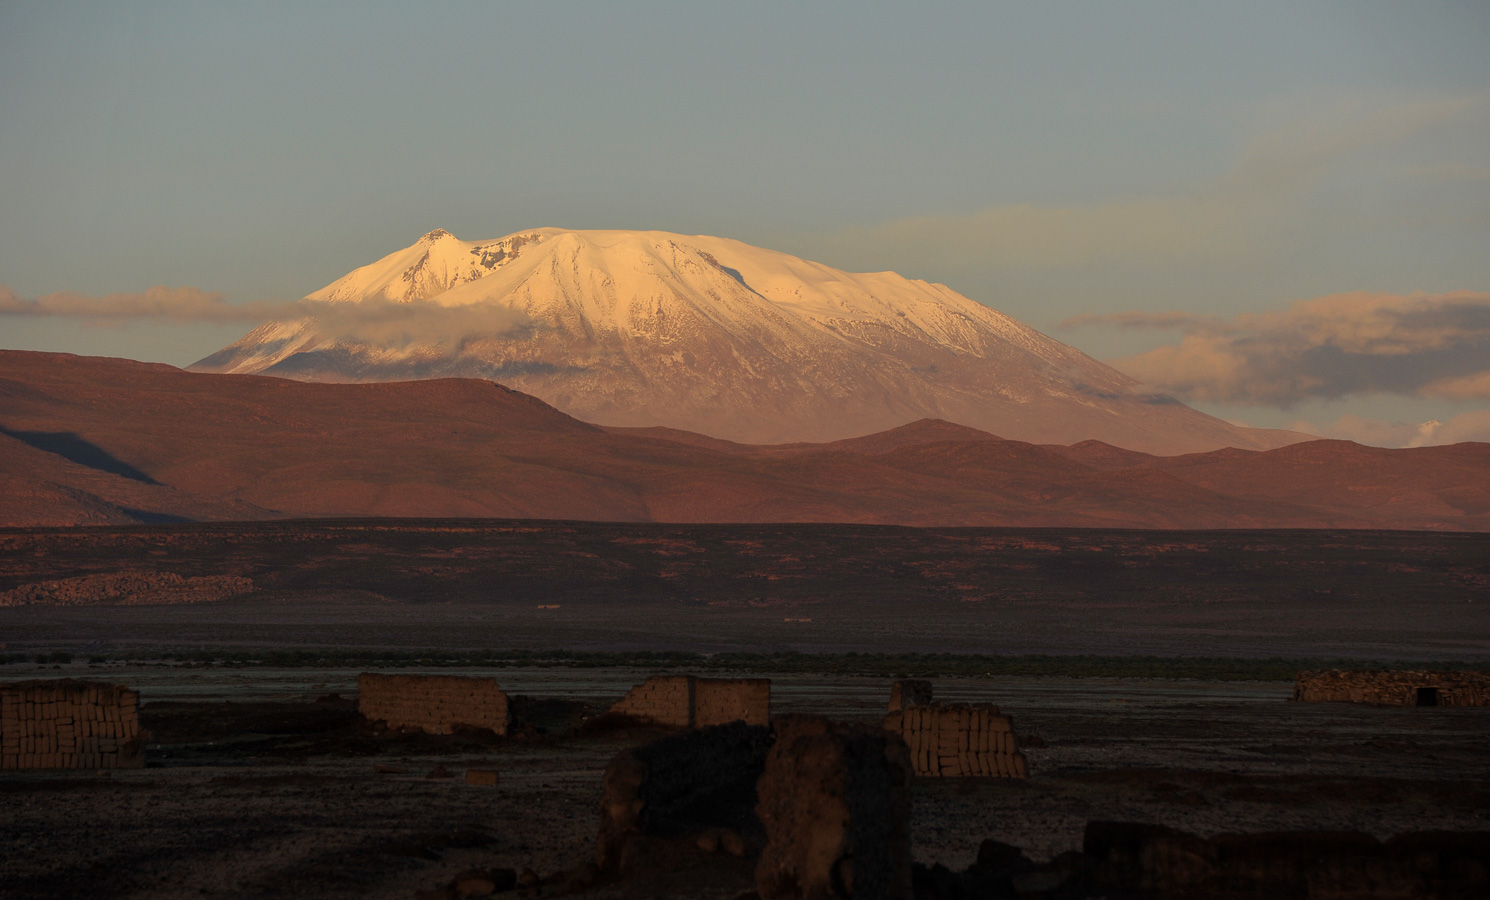 The Andes in the soft morning light [190 mm, 1/500 sec at f / 7.1, ISO 500]